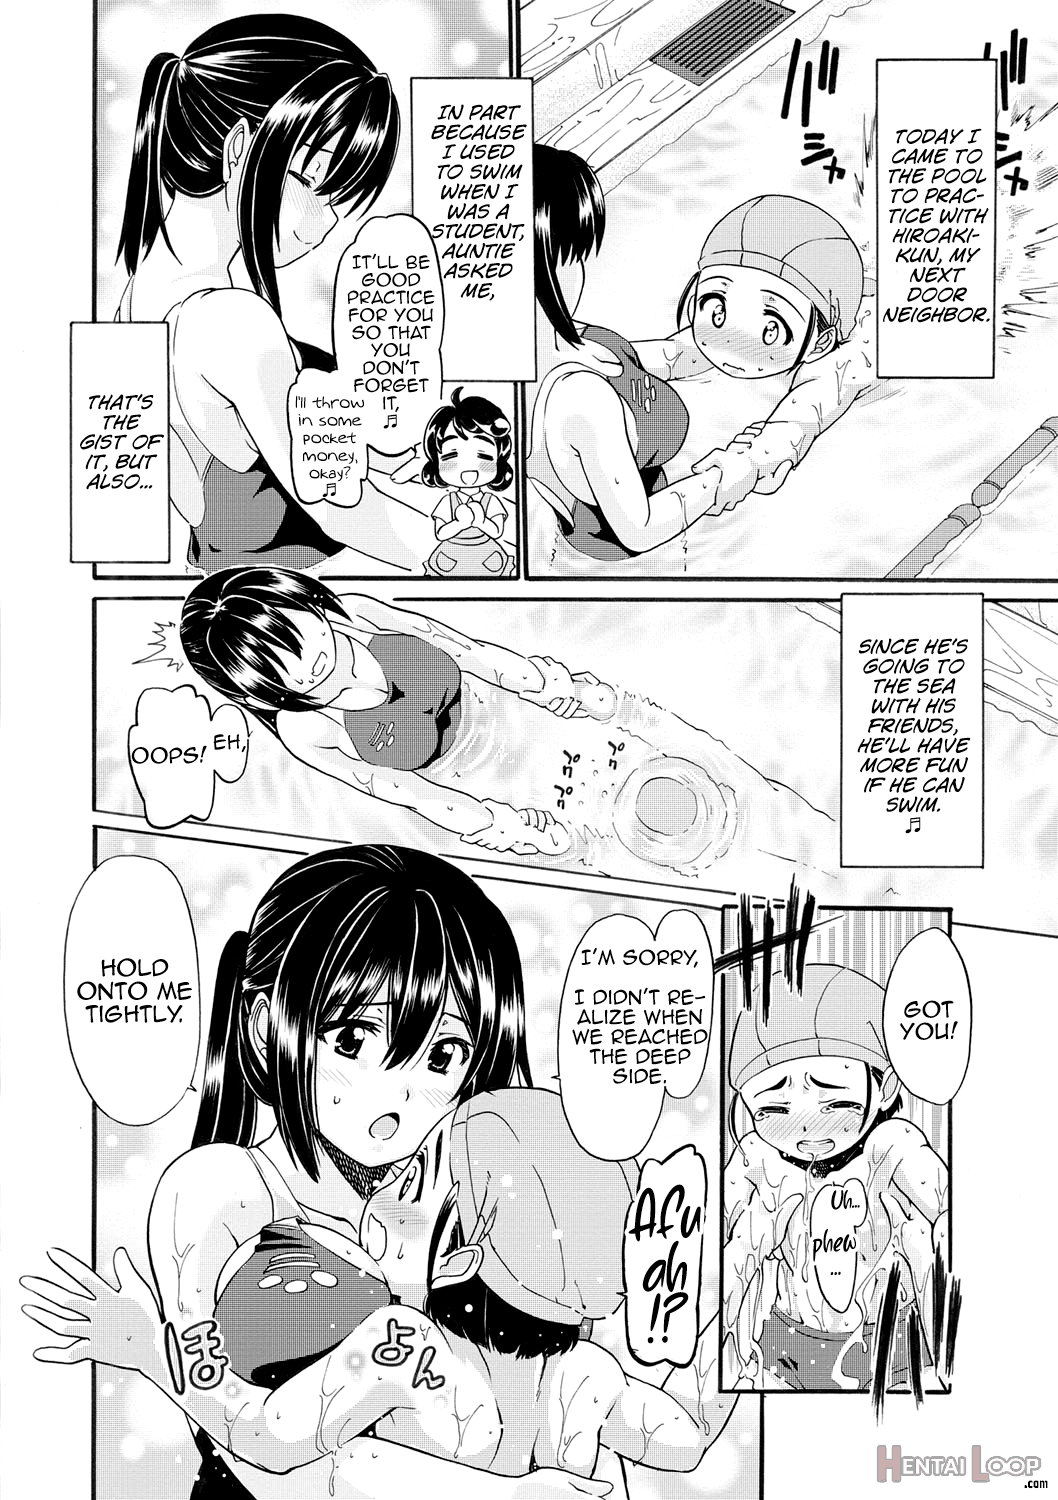 Oppai Suiren page 2